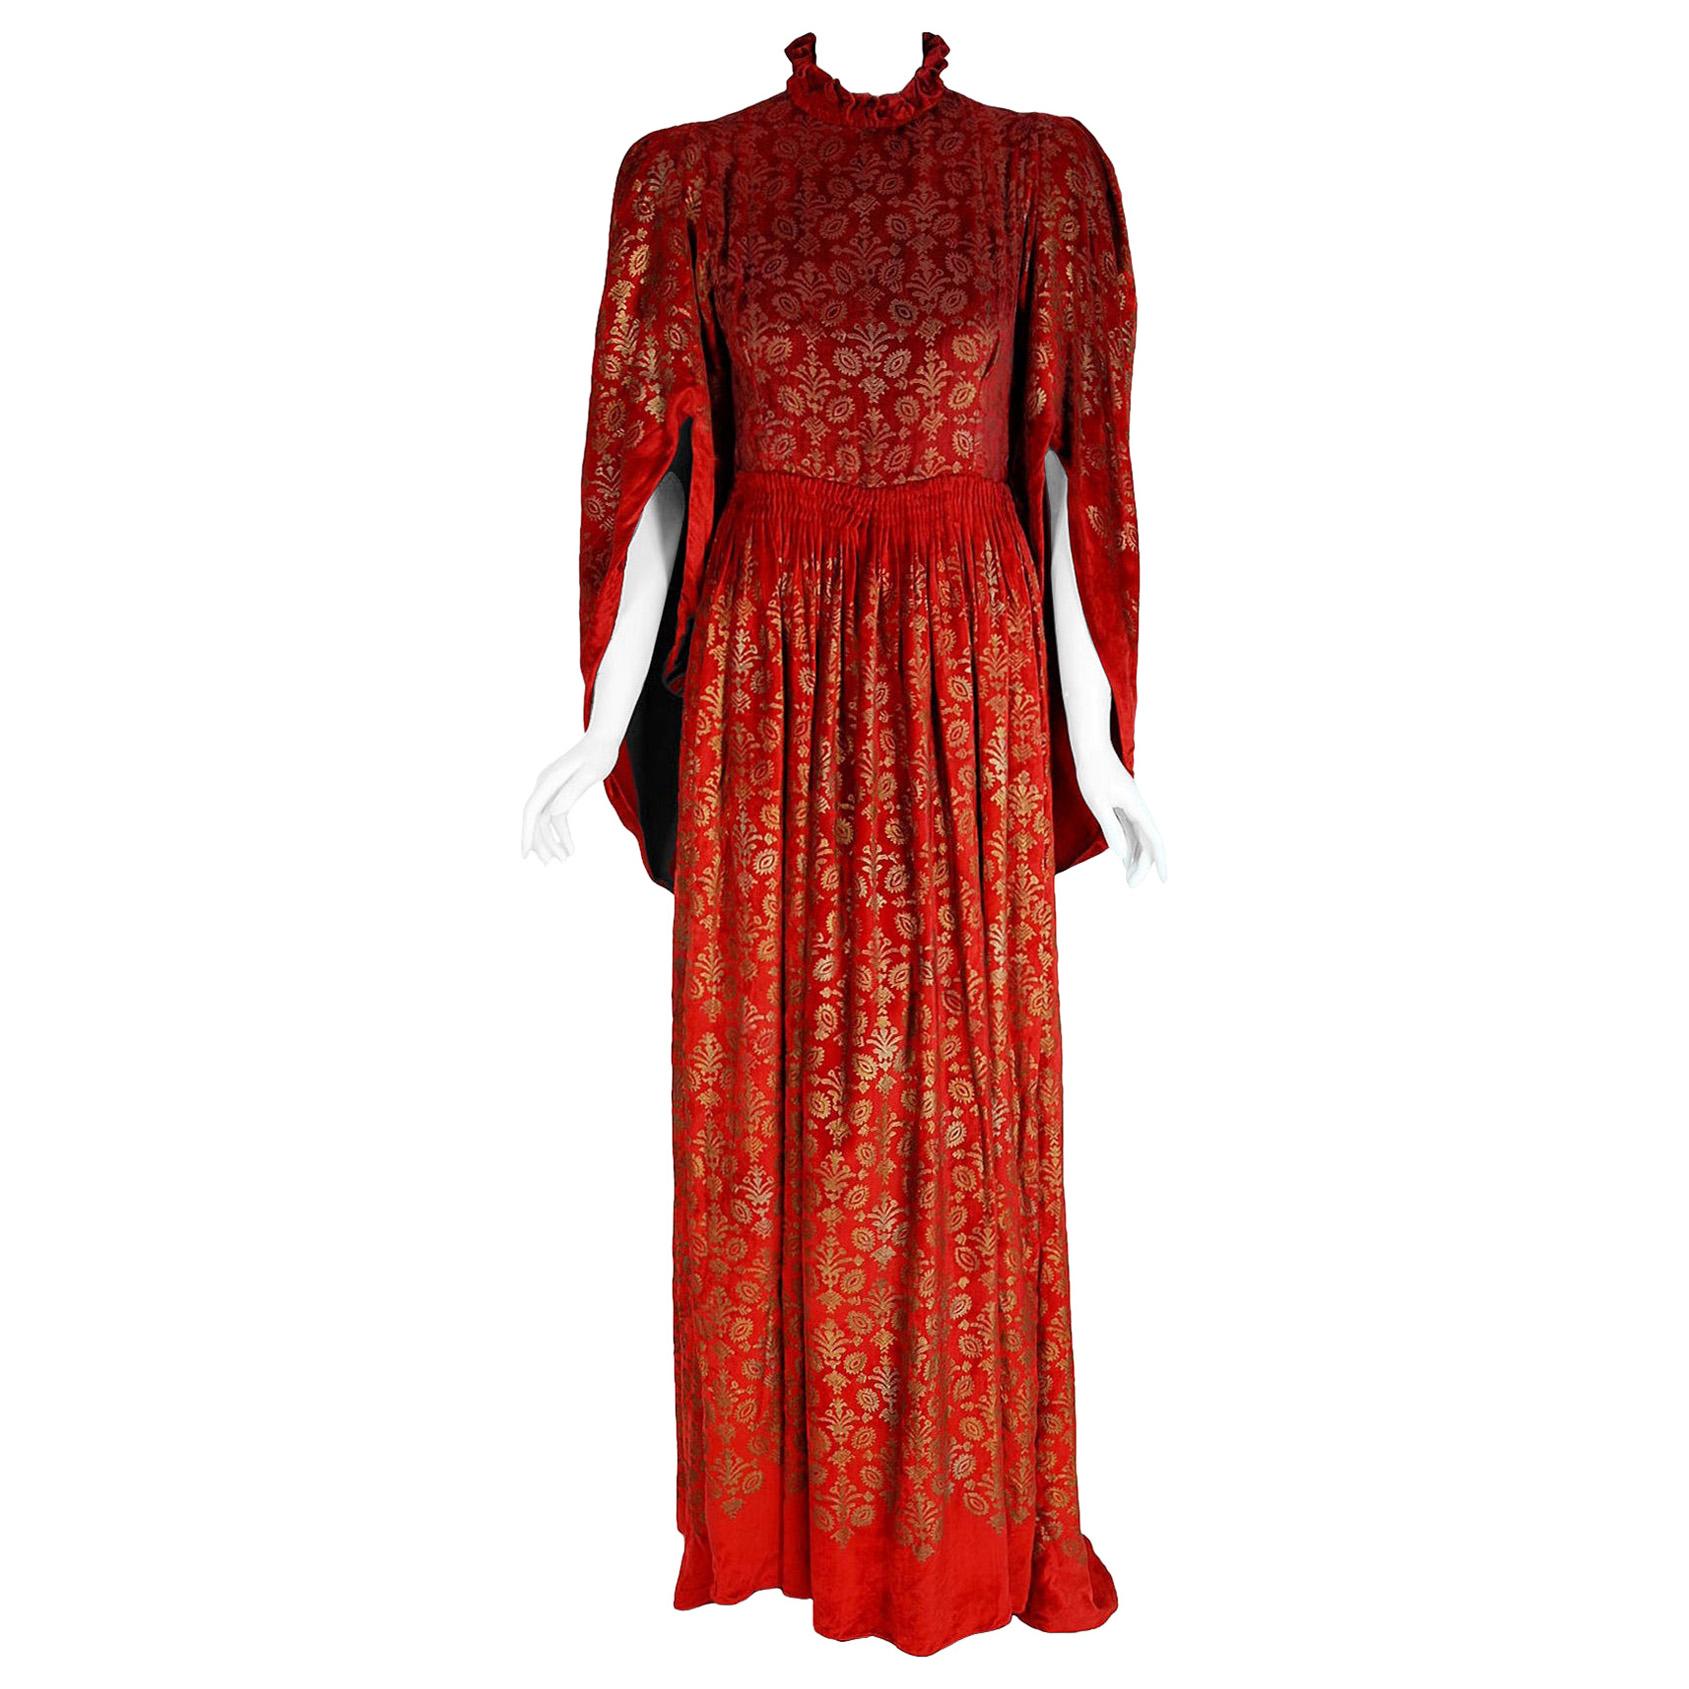 Vintage 1920's Gallenga Couture Metallic Stenciled Red Velvet Angel-Sleeve Gown For Sale